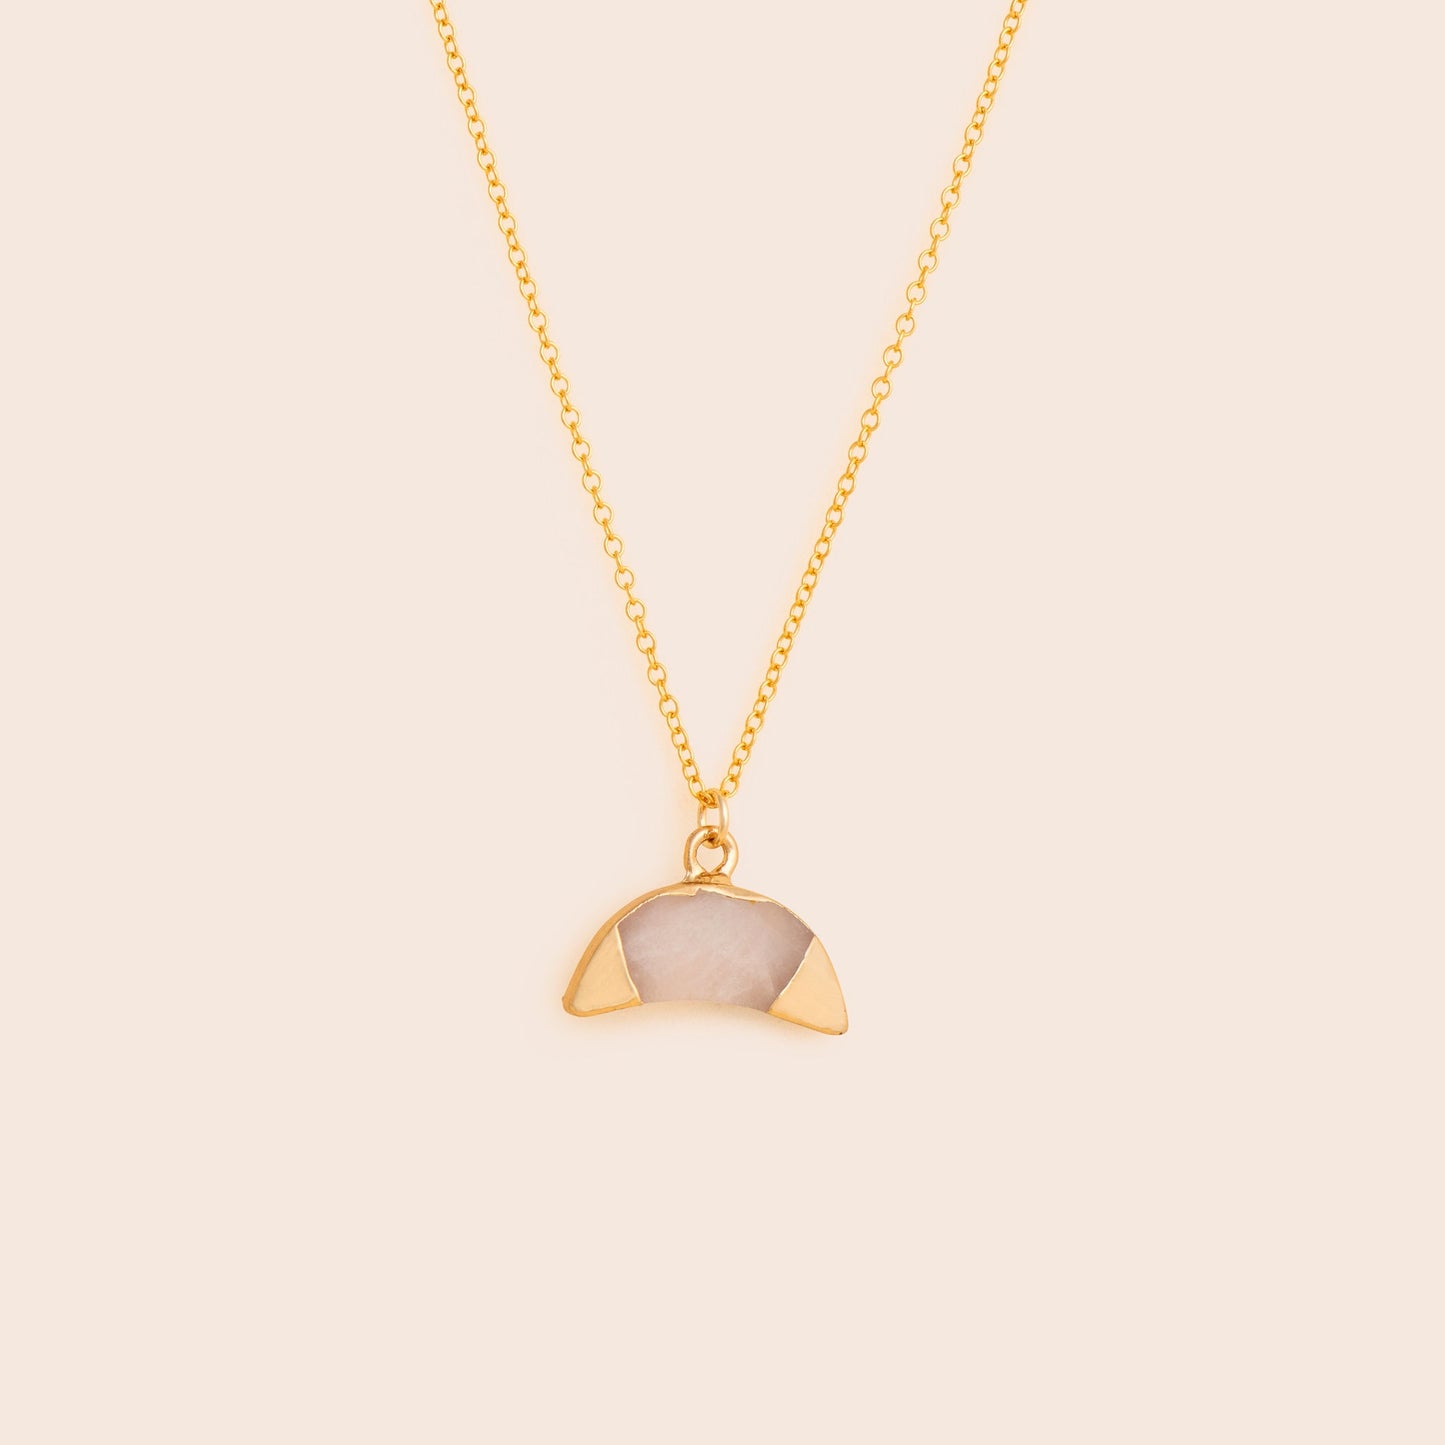 Load image into Gallery viewer, Rose Quartz Crescent Moon Necklace - Gemlet
